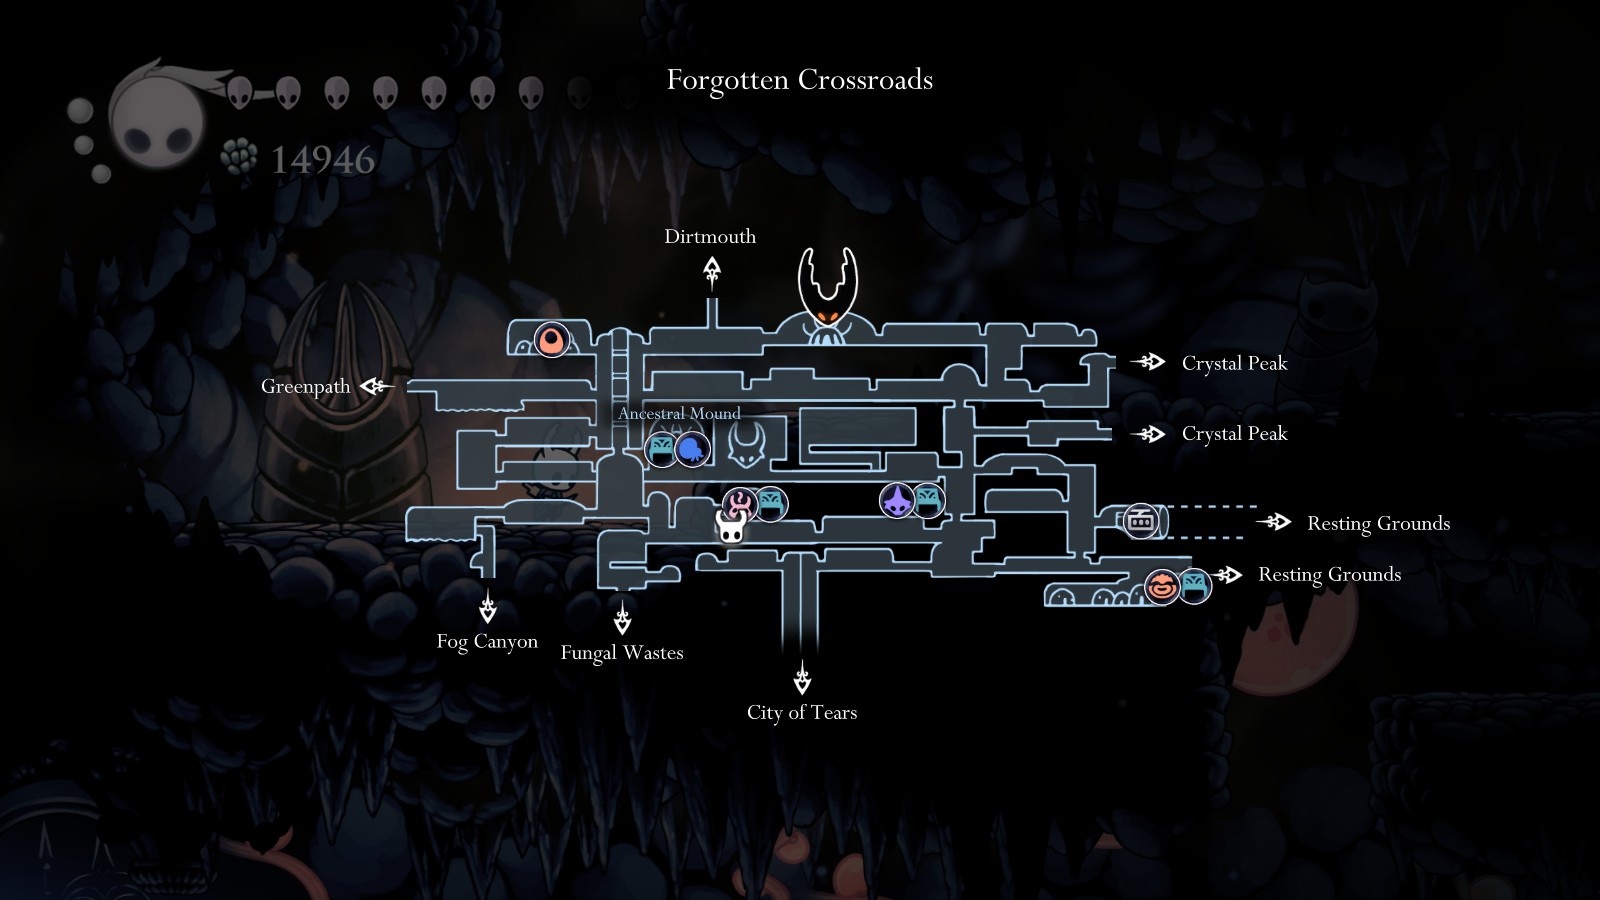 hollow knight mask shard locations map